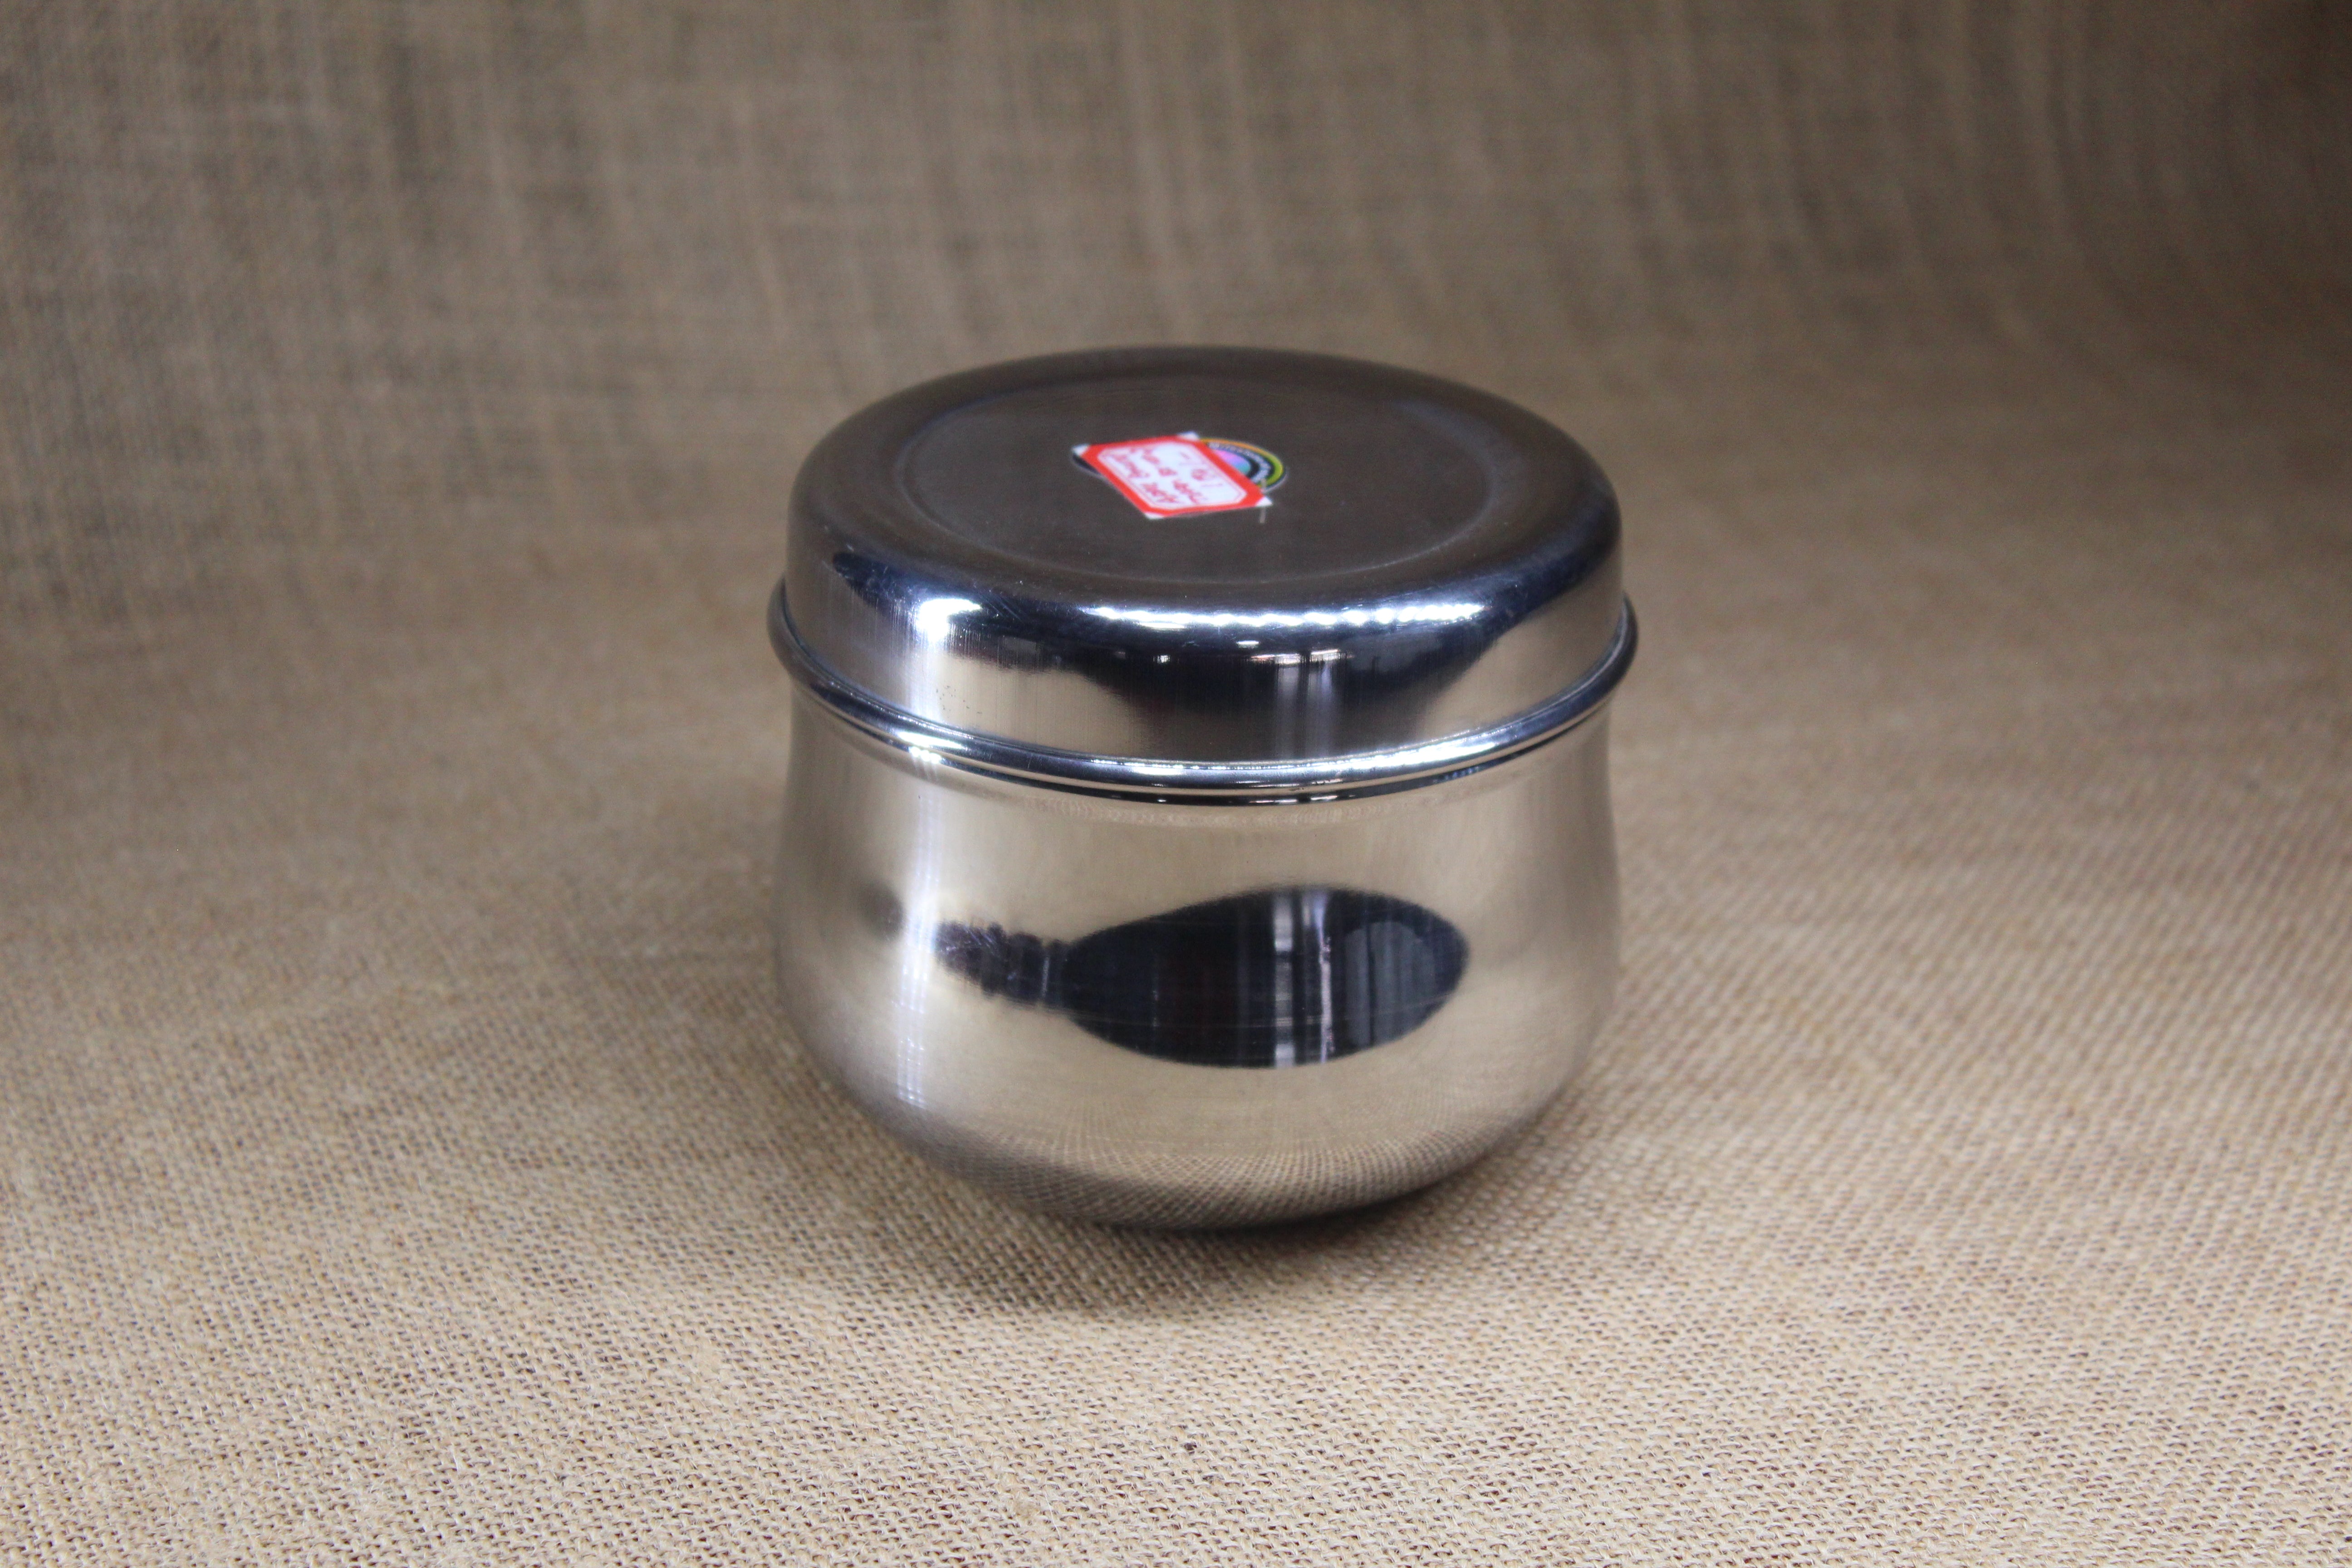 Stainless Steel Belly Dabba